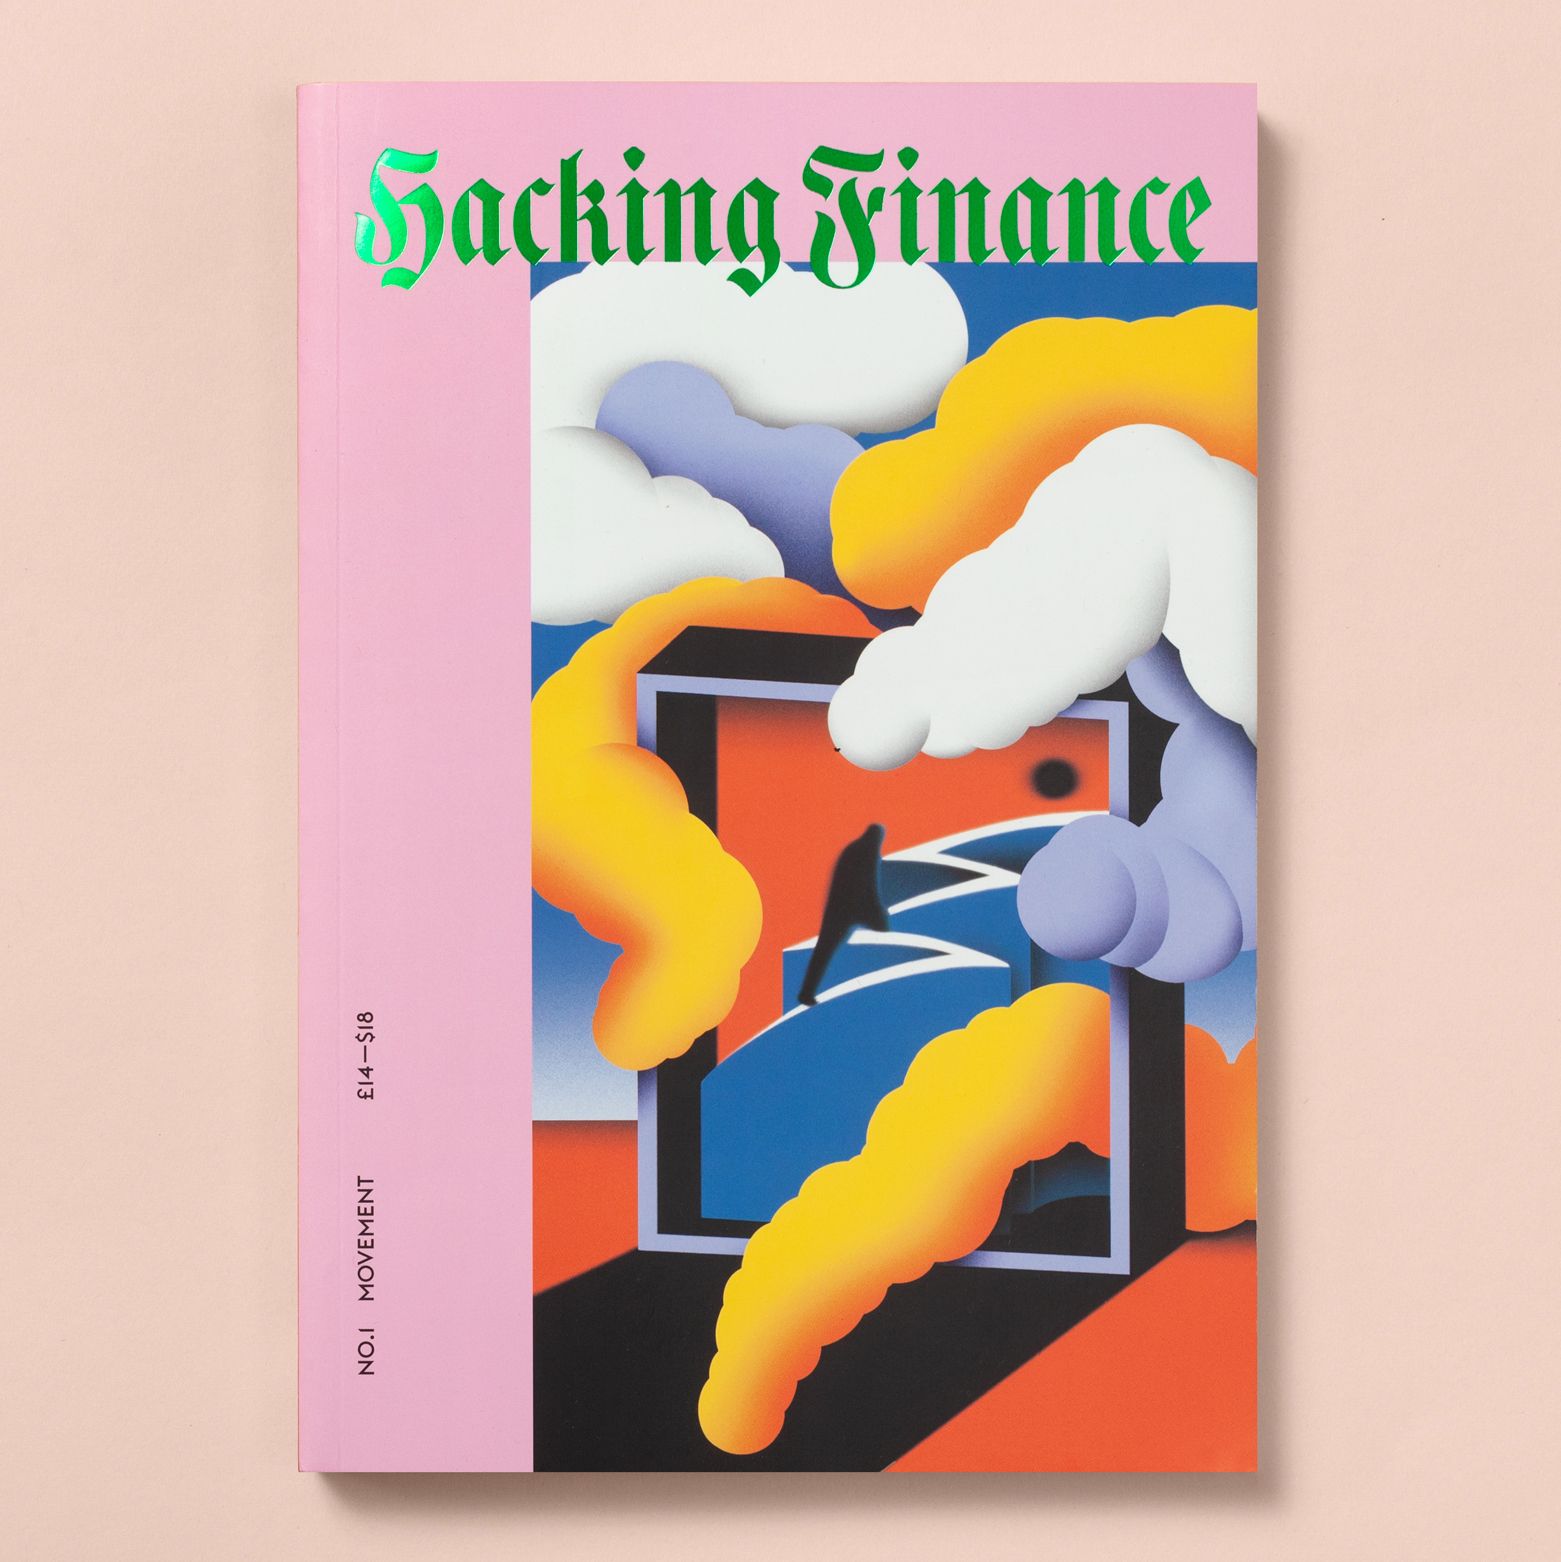 Hacking Finance Issue 1